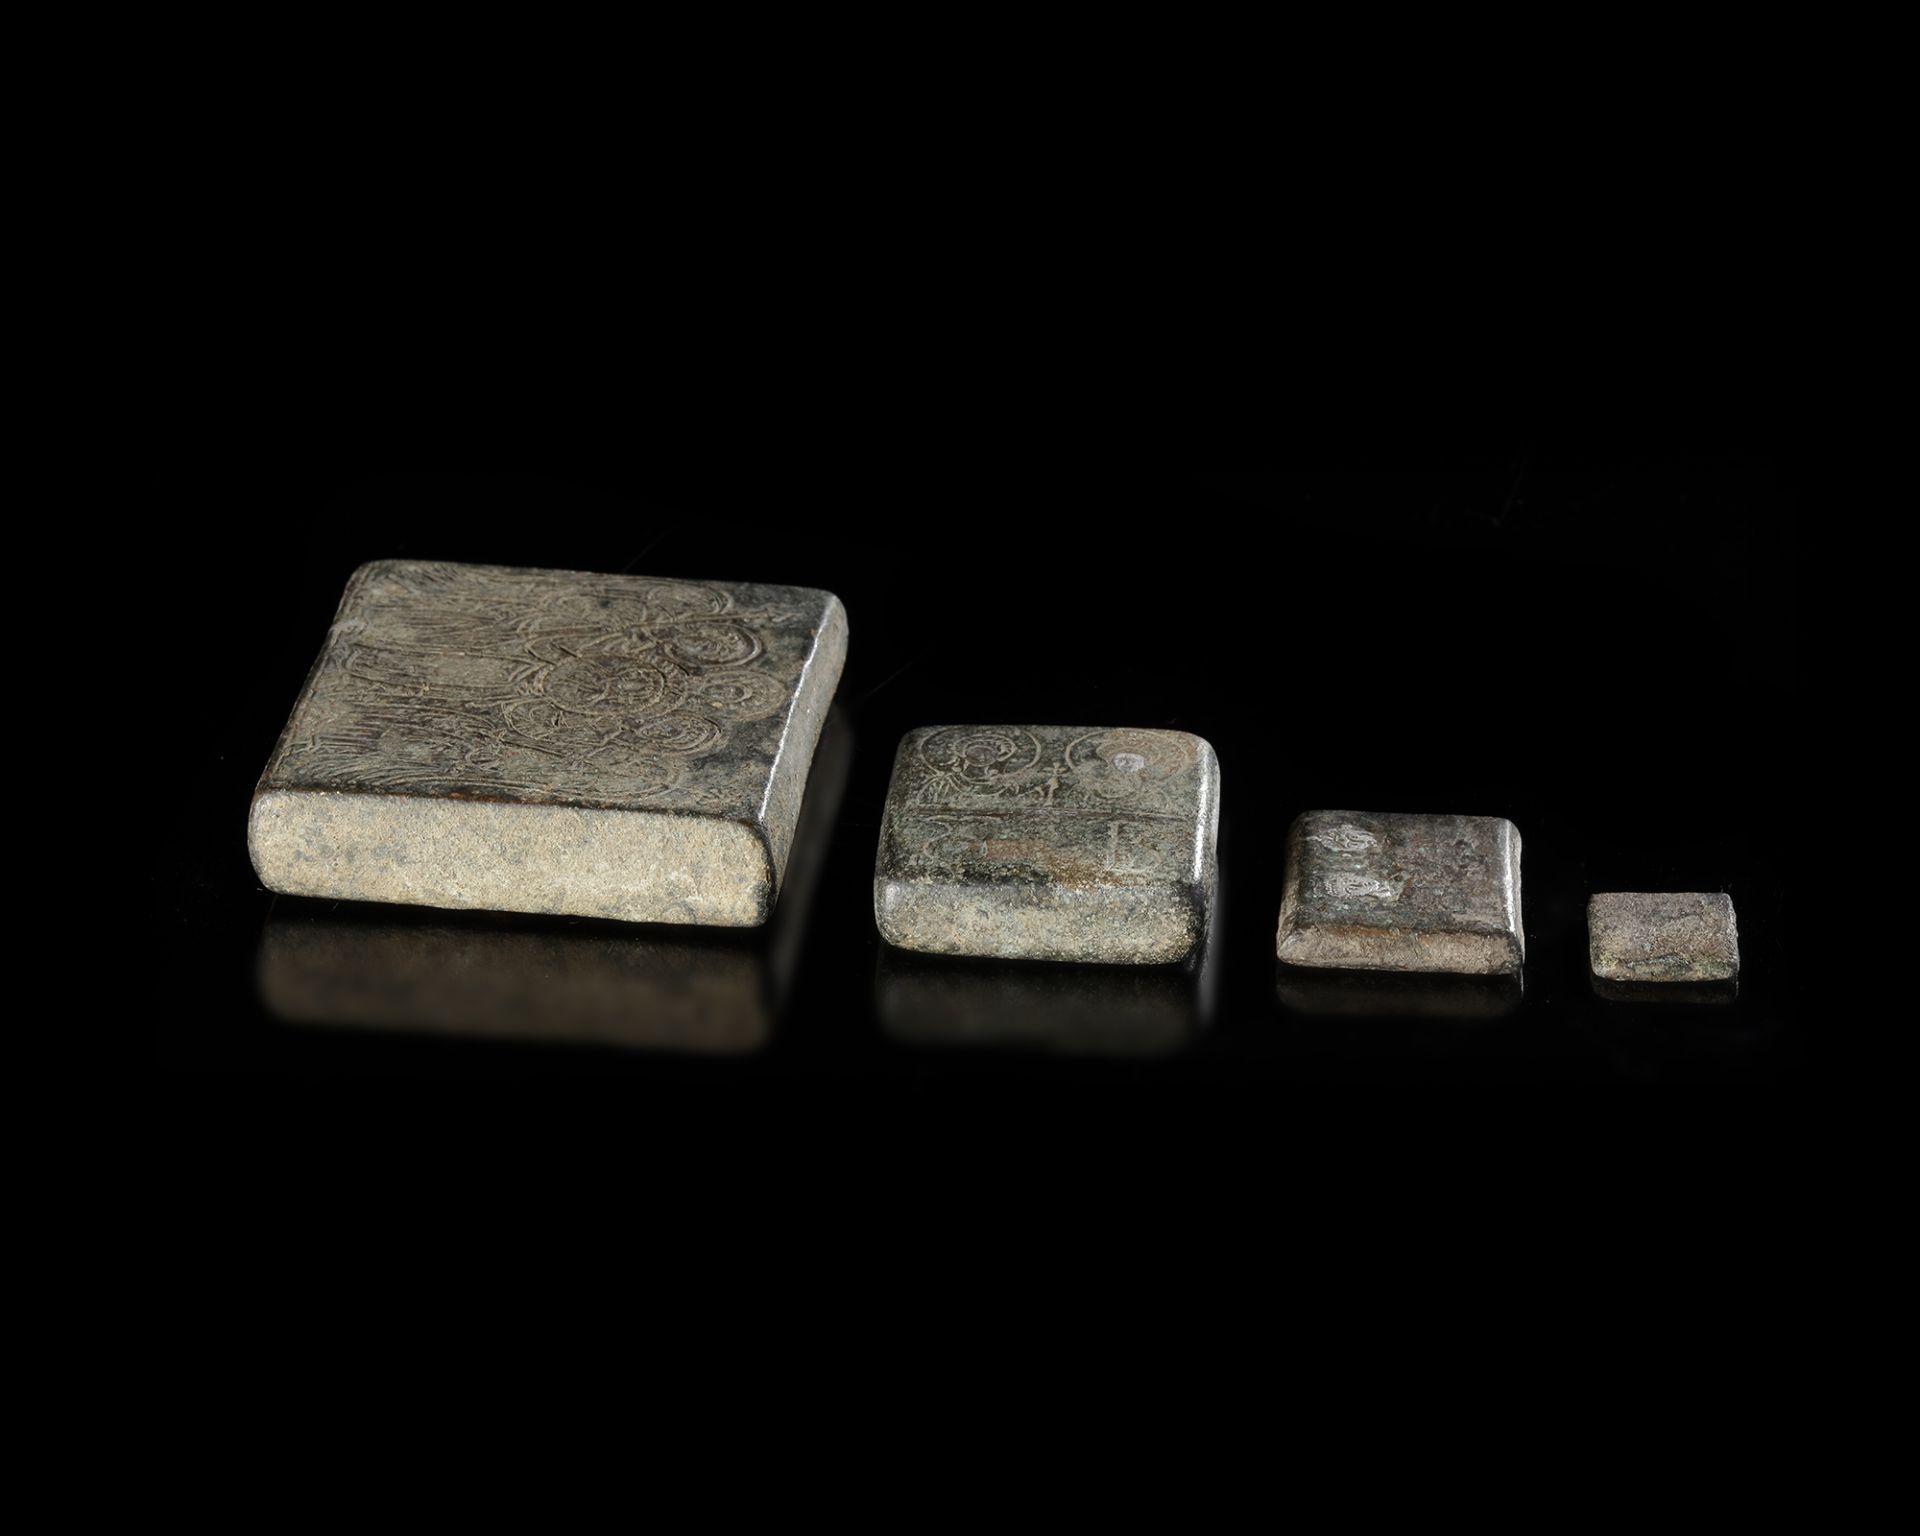 FOUR BYZANTINE COMMERCIAL WEIGHTS WITH SILVER INLAY, 5TH-7TH CENTURY AD - Image 4 of 4